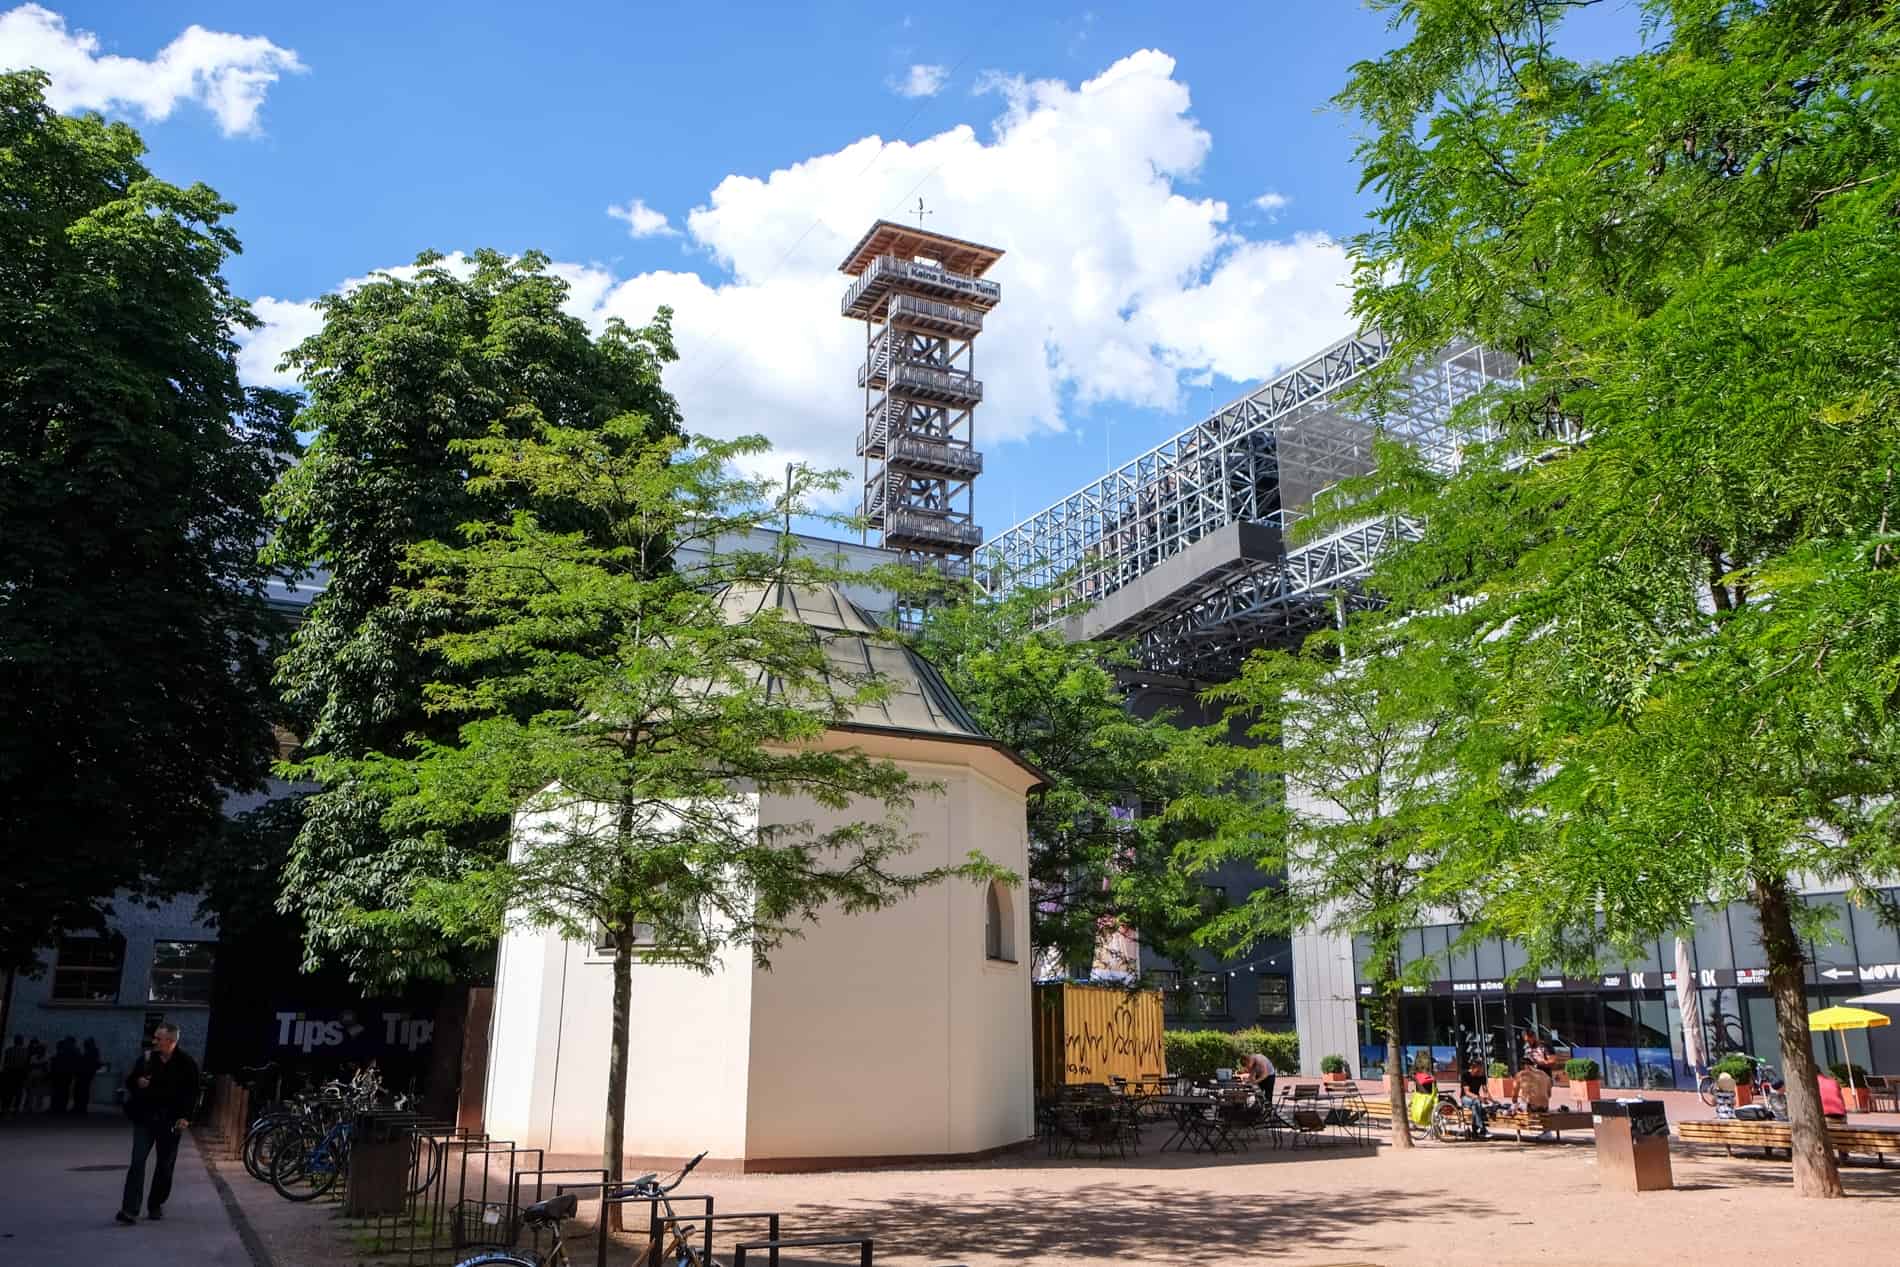 A wooden tower and art space of the creative OÖ Kulturquartier (Culture Quarter) in Linz.